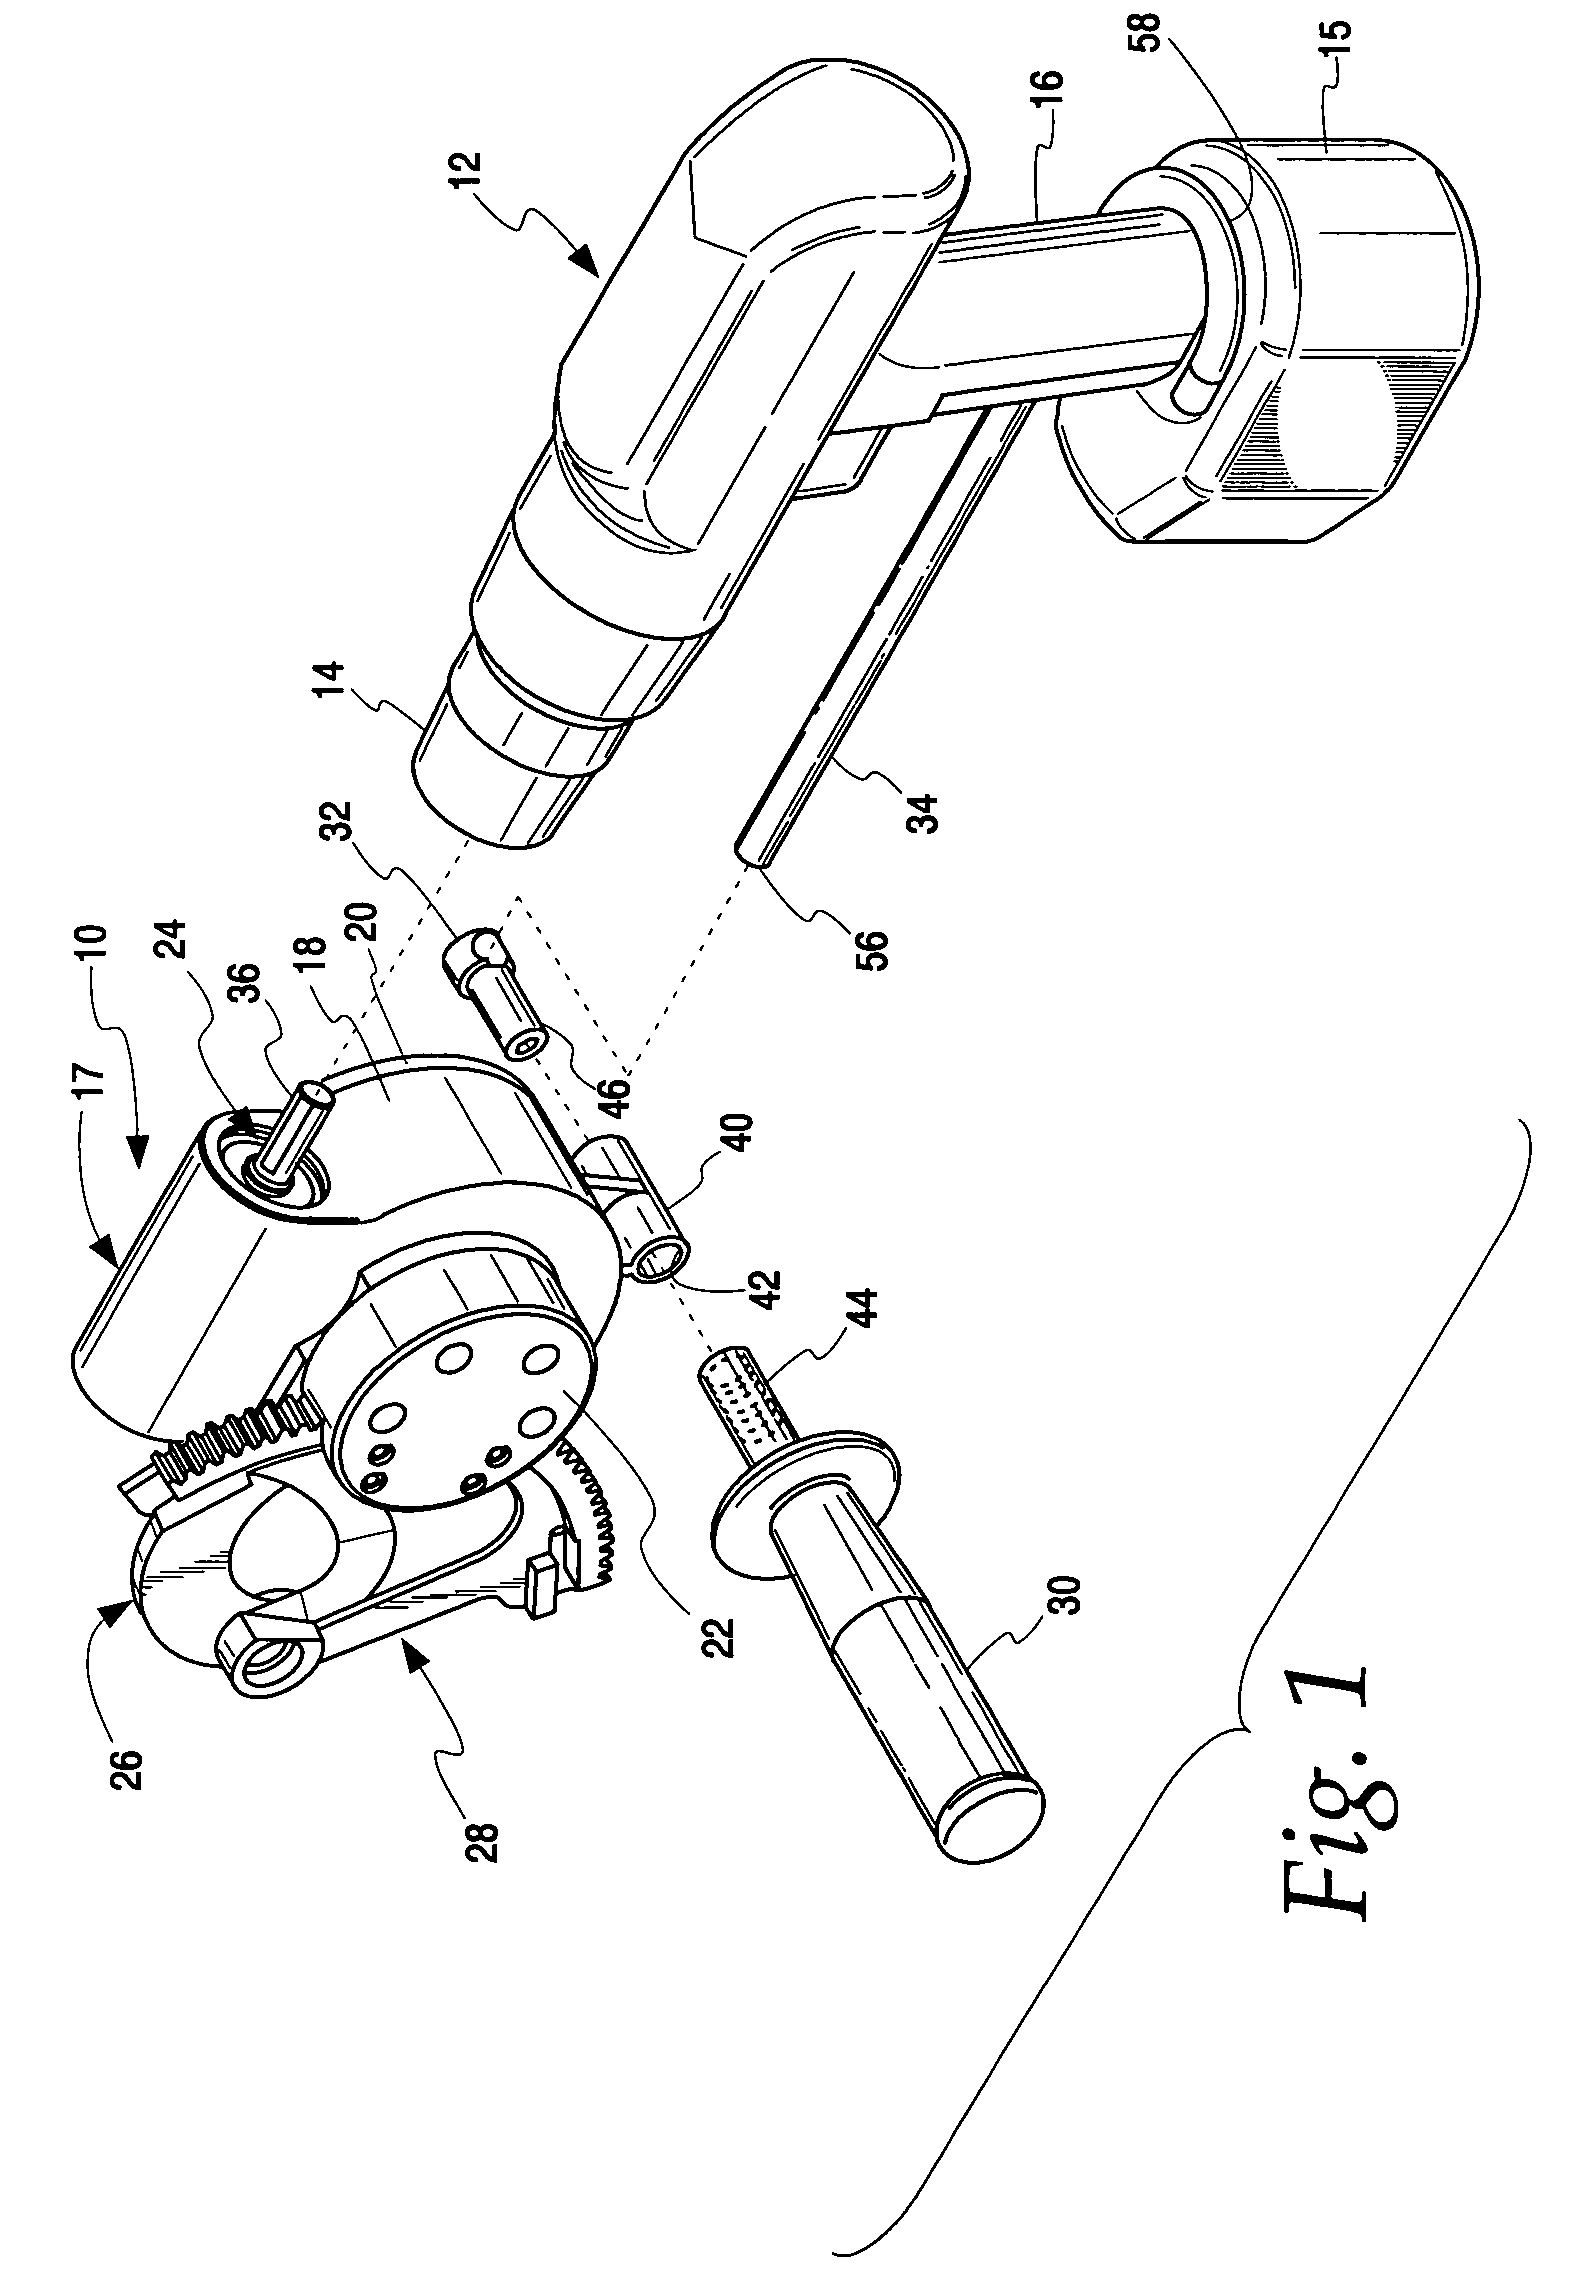 Drill powered cable cutter